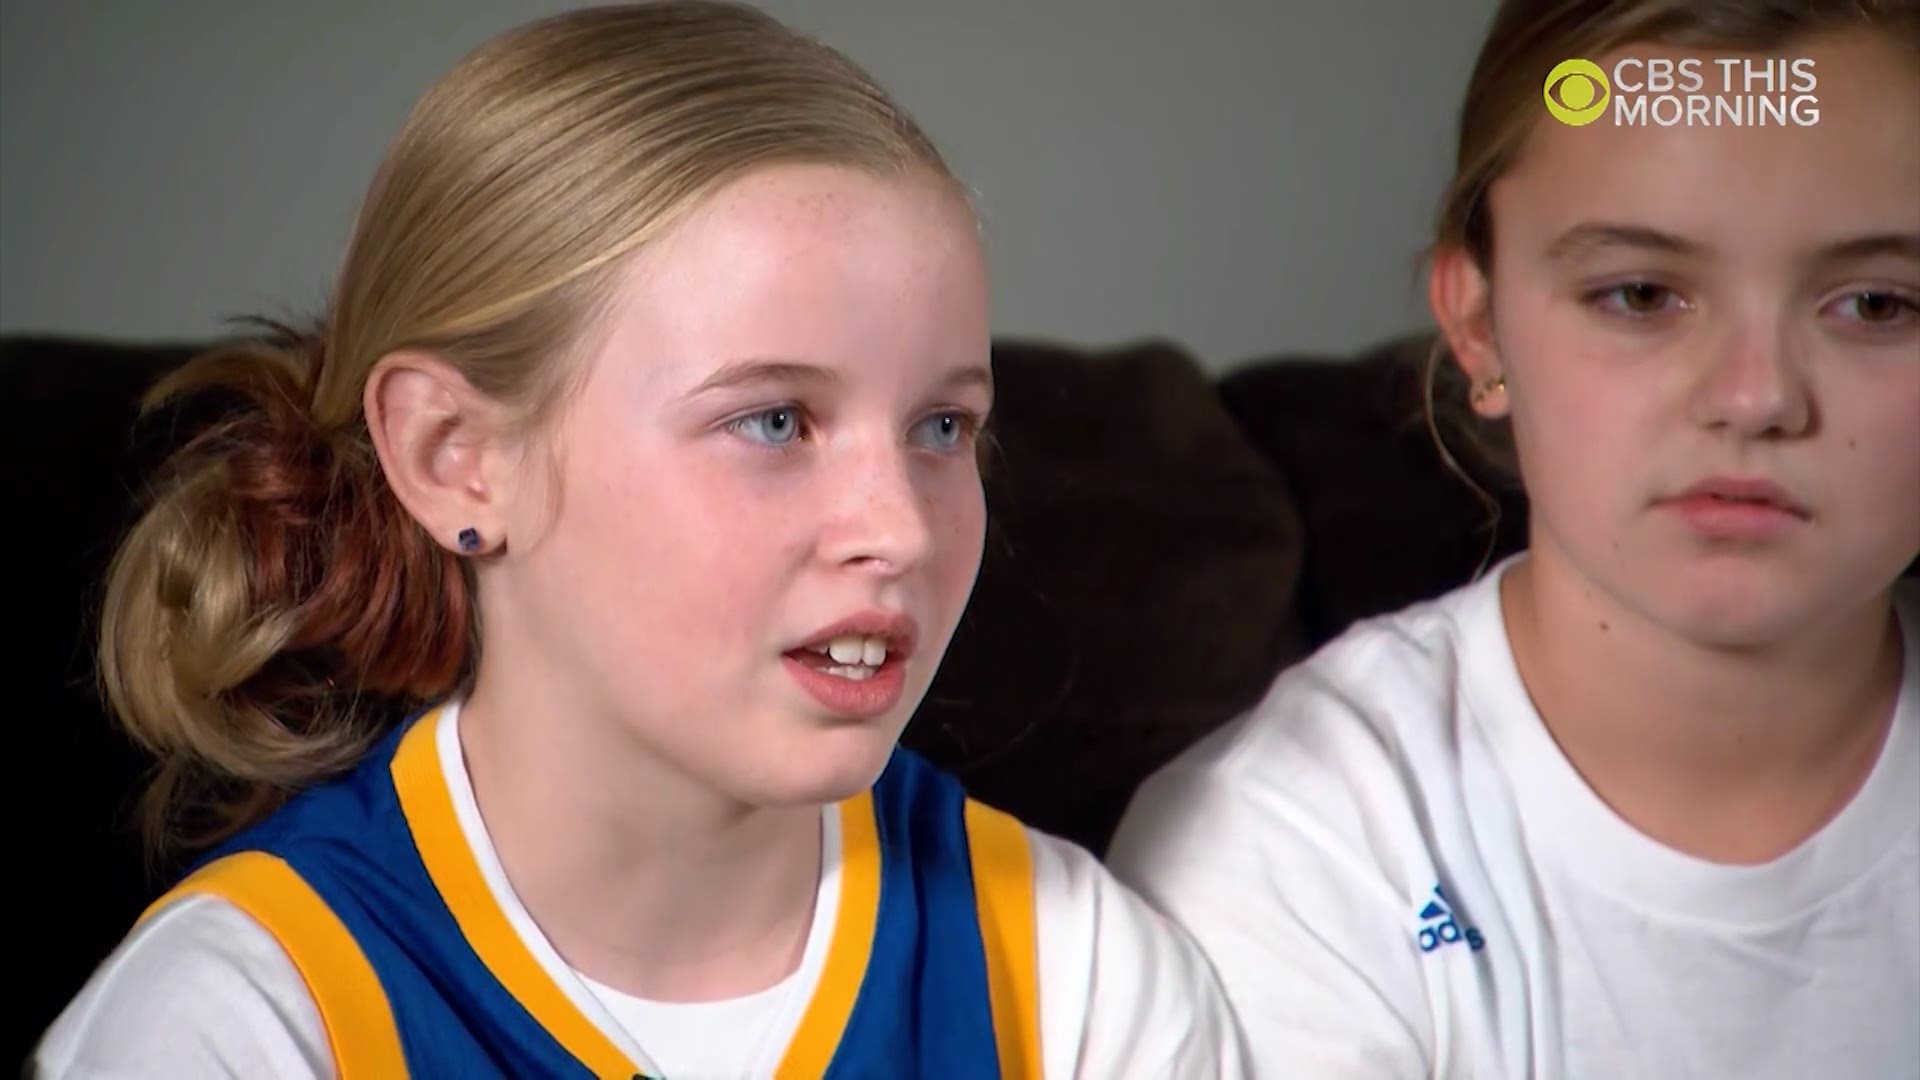 Riley Morrison wrote to Warriors' Steph Curry asking why his shoes don't come in girls' sizes.